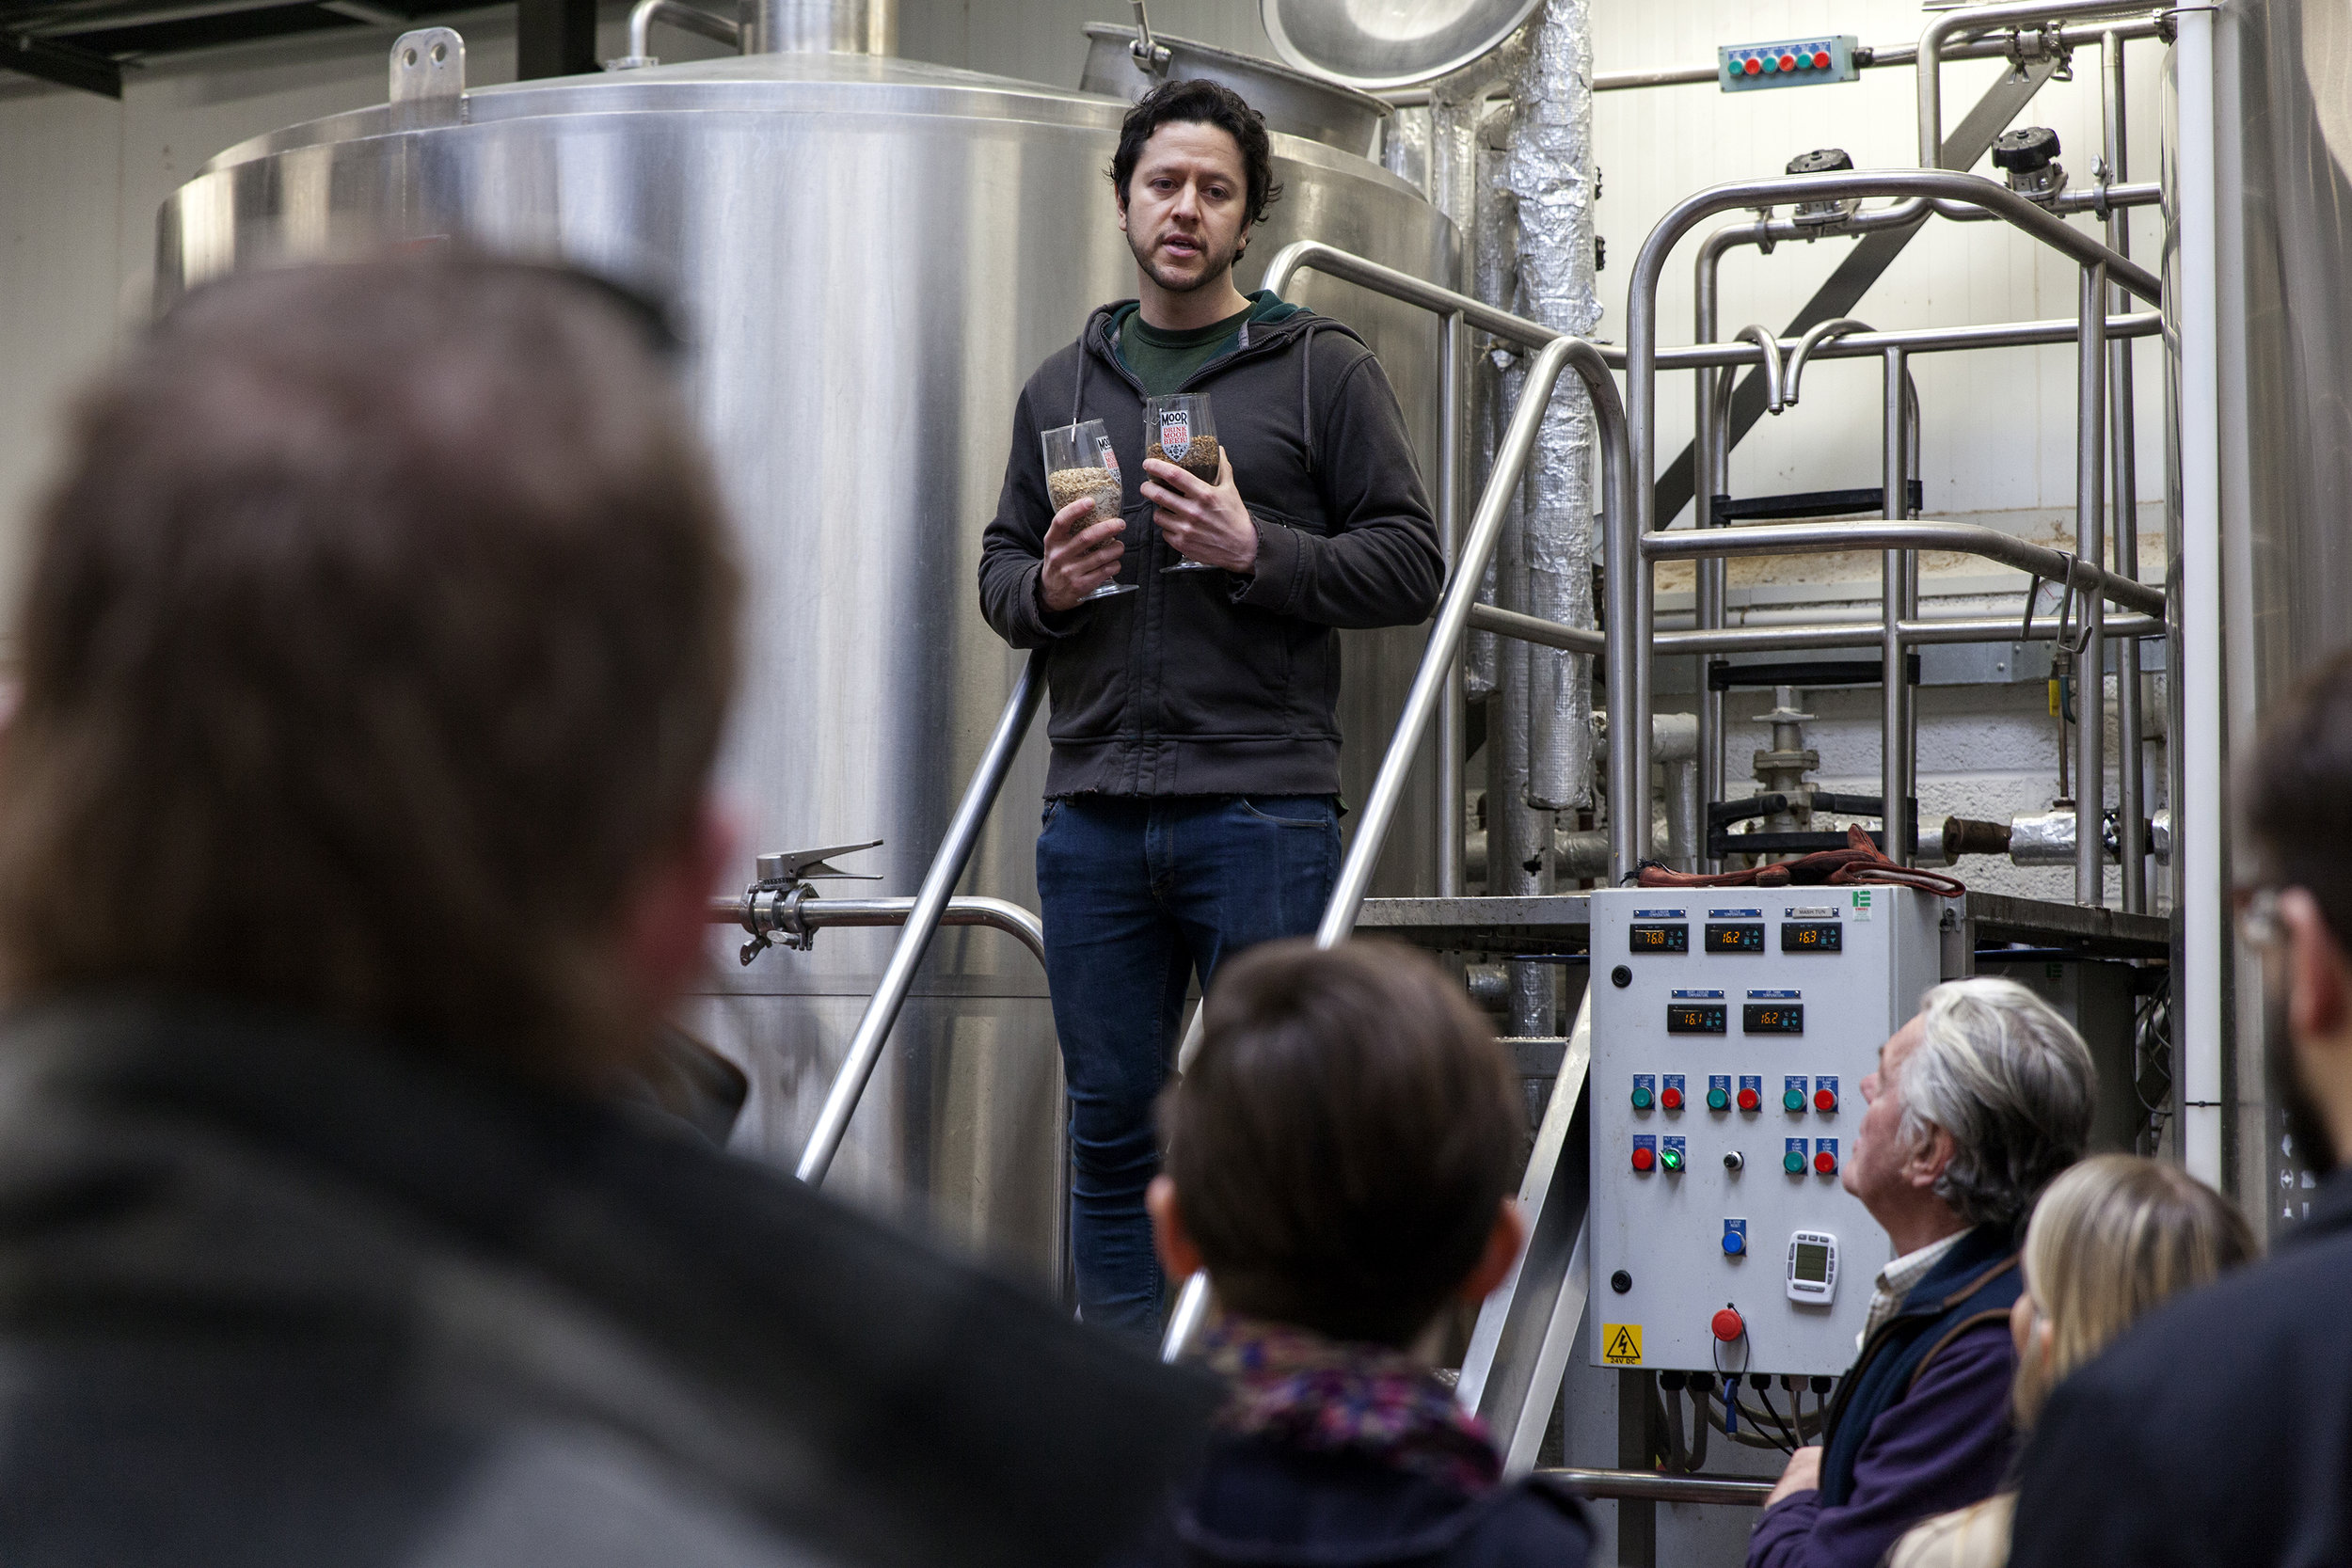 London Brewery Tours Brewery Tours in London South East London Club Card 14.jpg